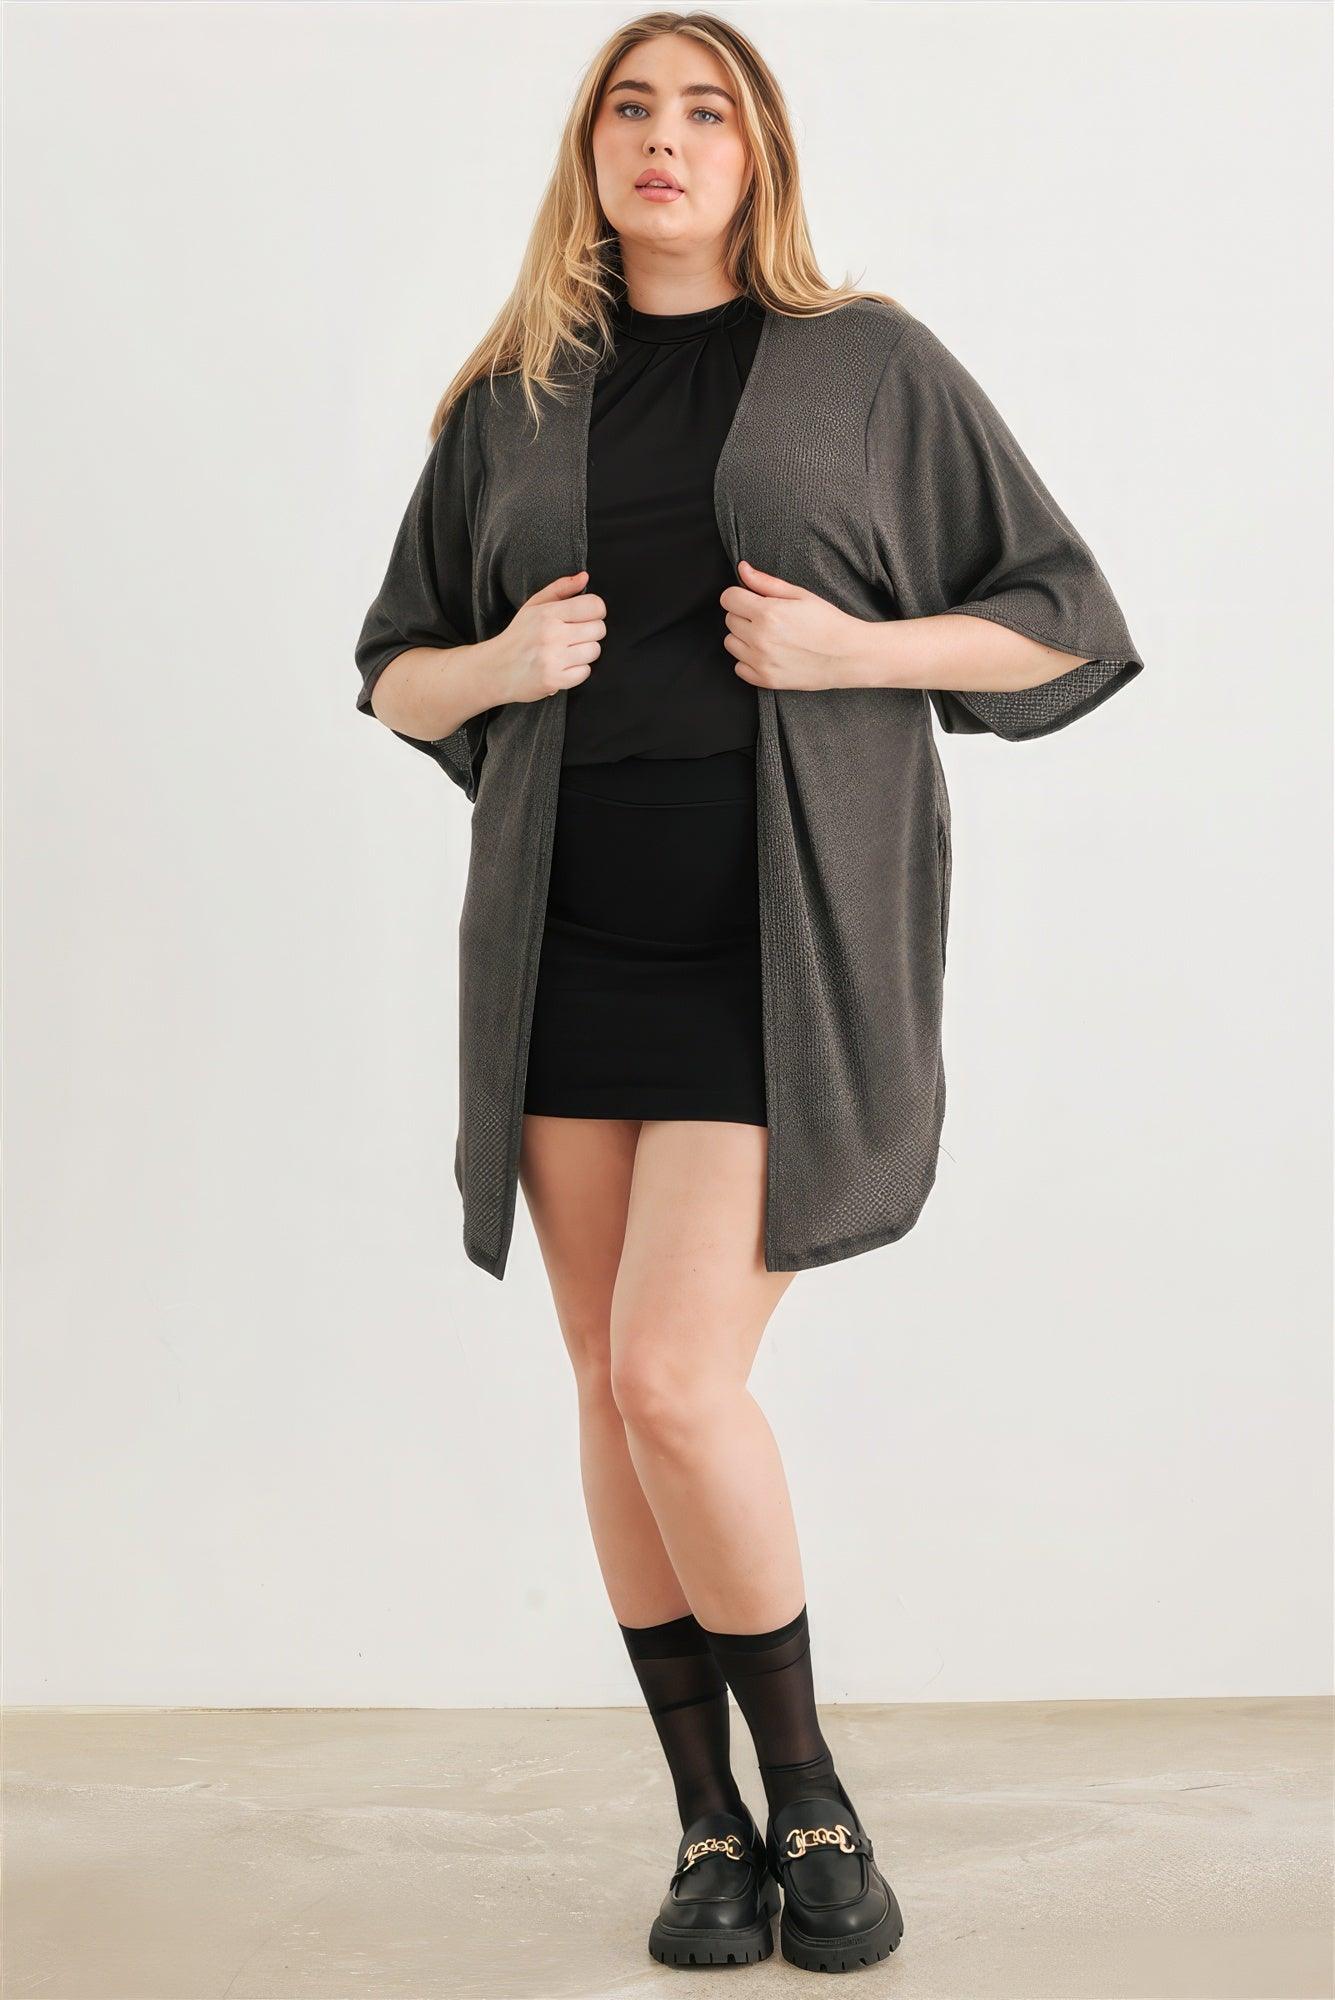 Women's Sweaters - Cardigans Plus Charcoal Knit Open Front Cardigan